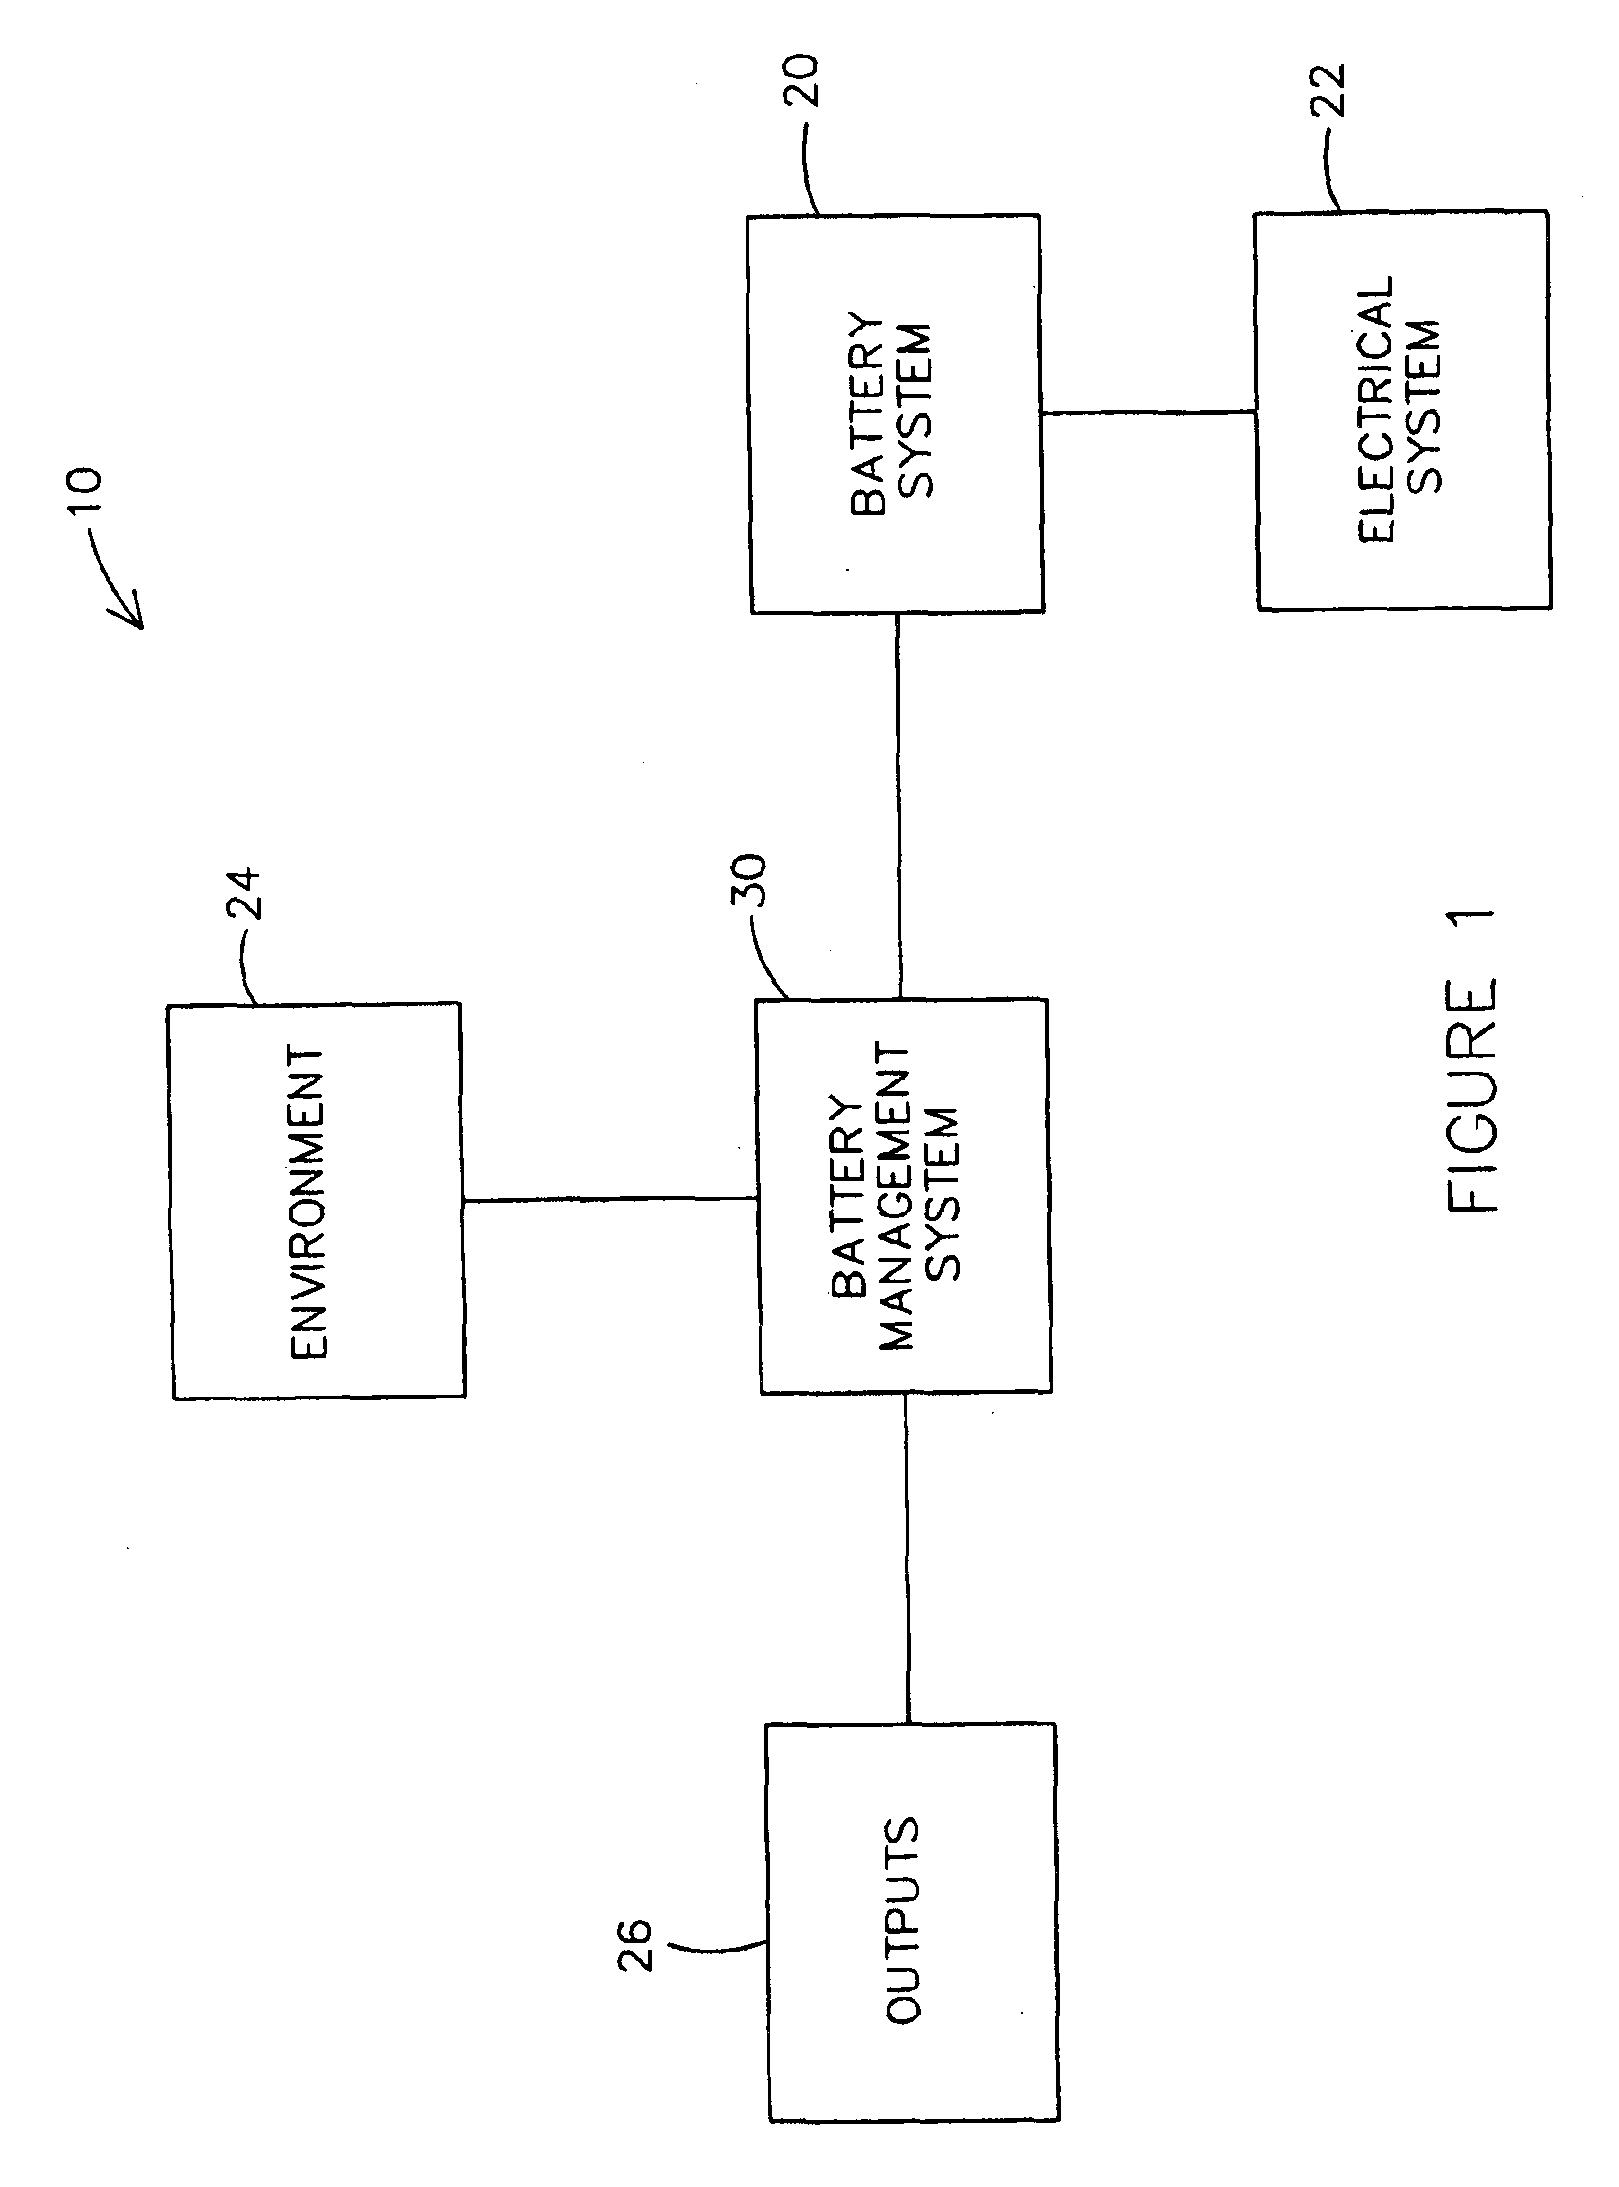 Battery monitoring system and method